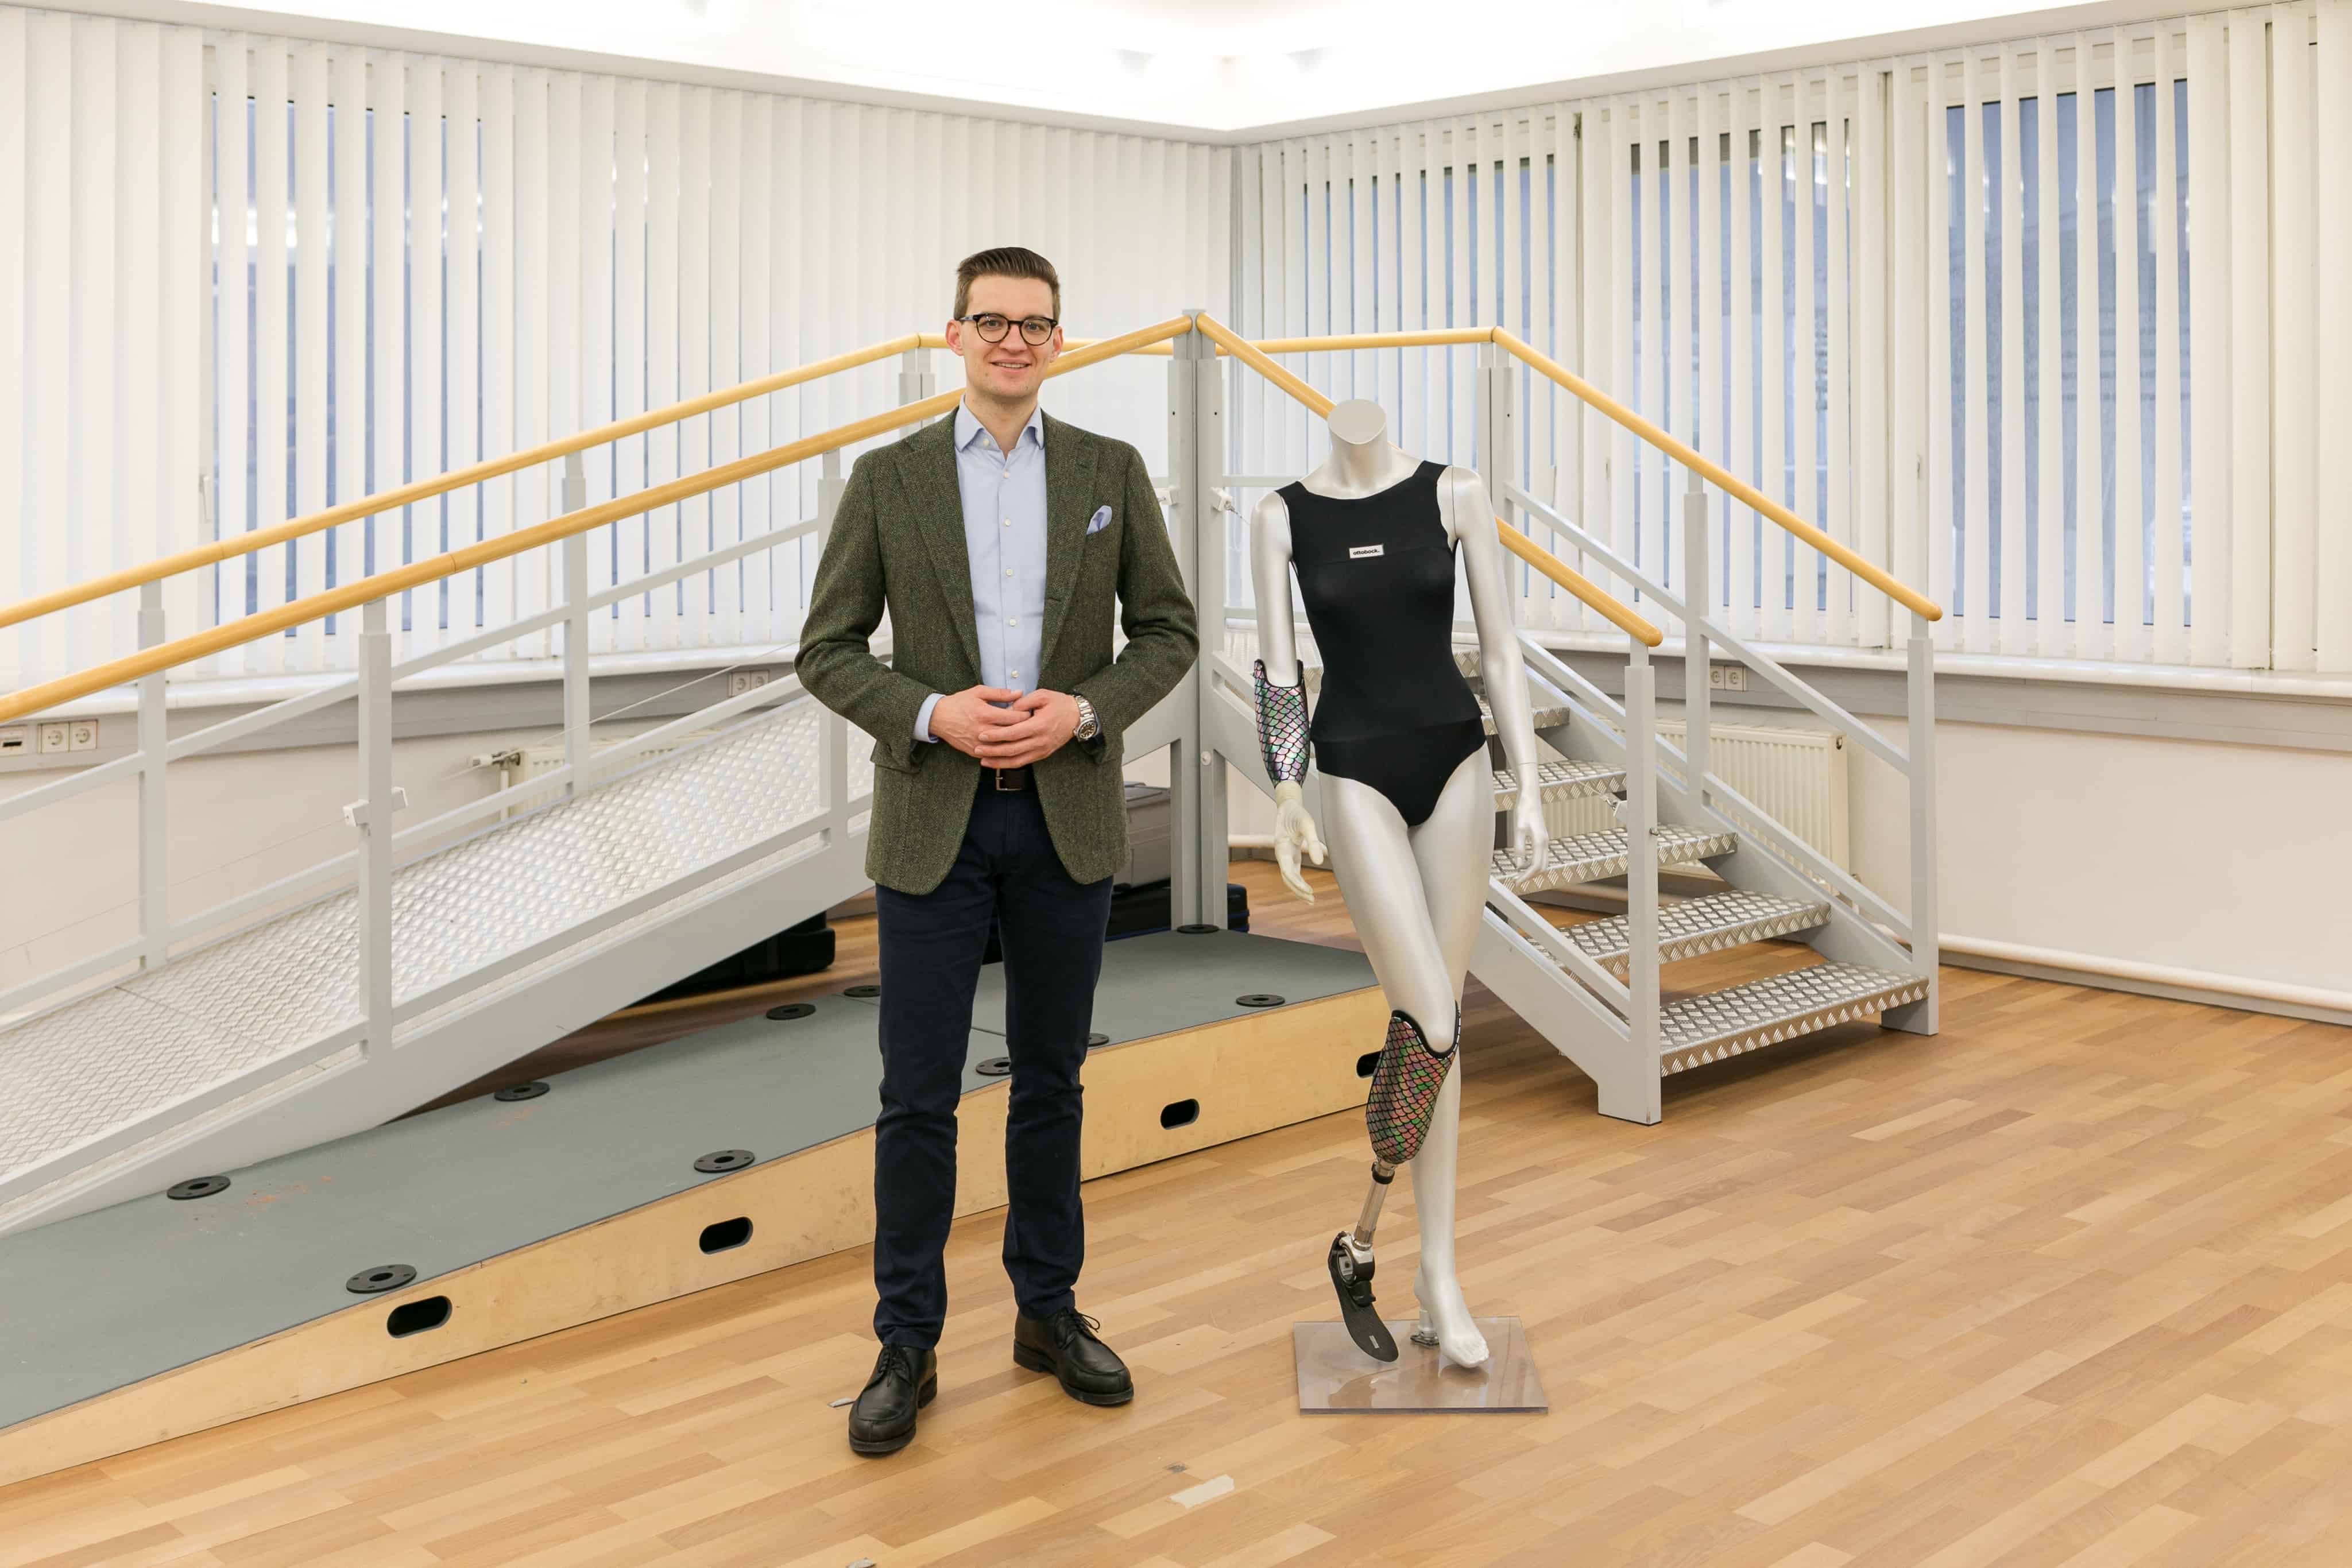 Walking easier with a data-driven knee prosthesis